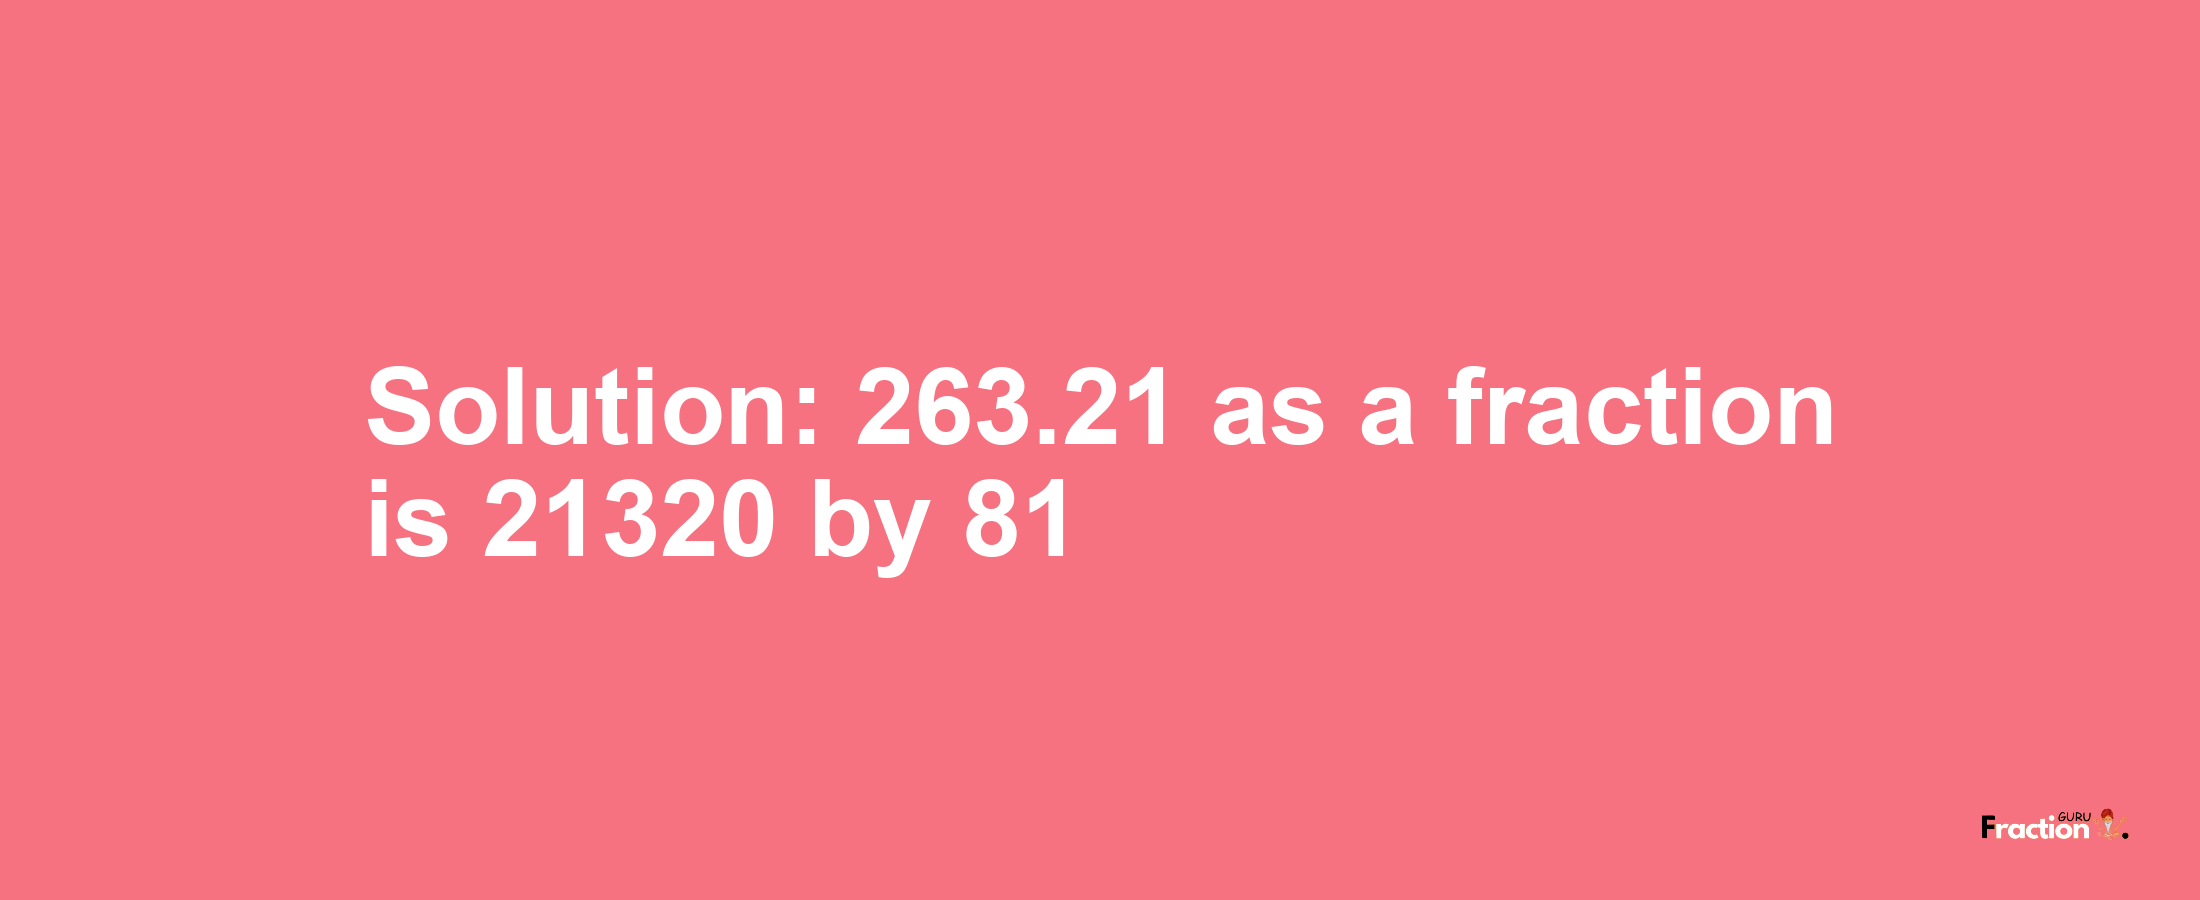 Solution:263.21 as a fraction is 21320/81